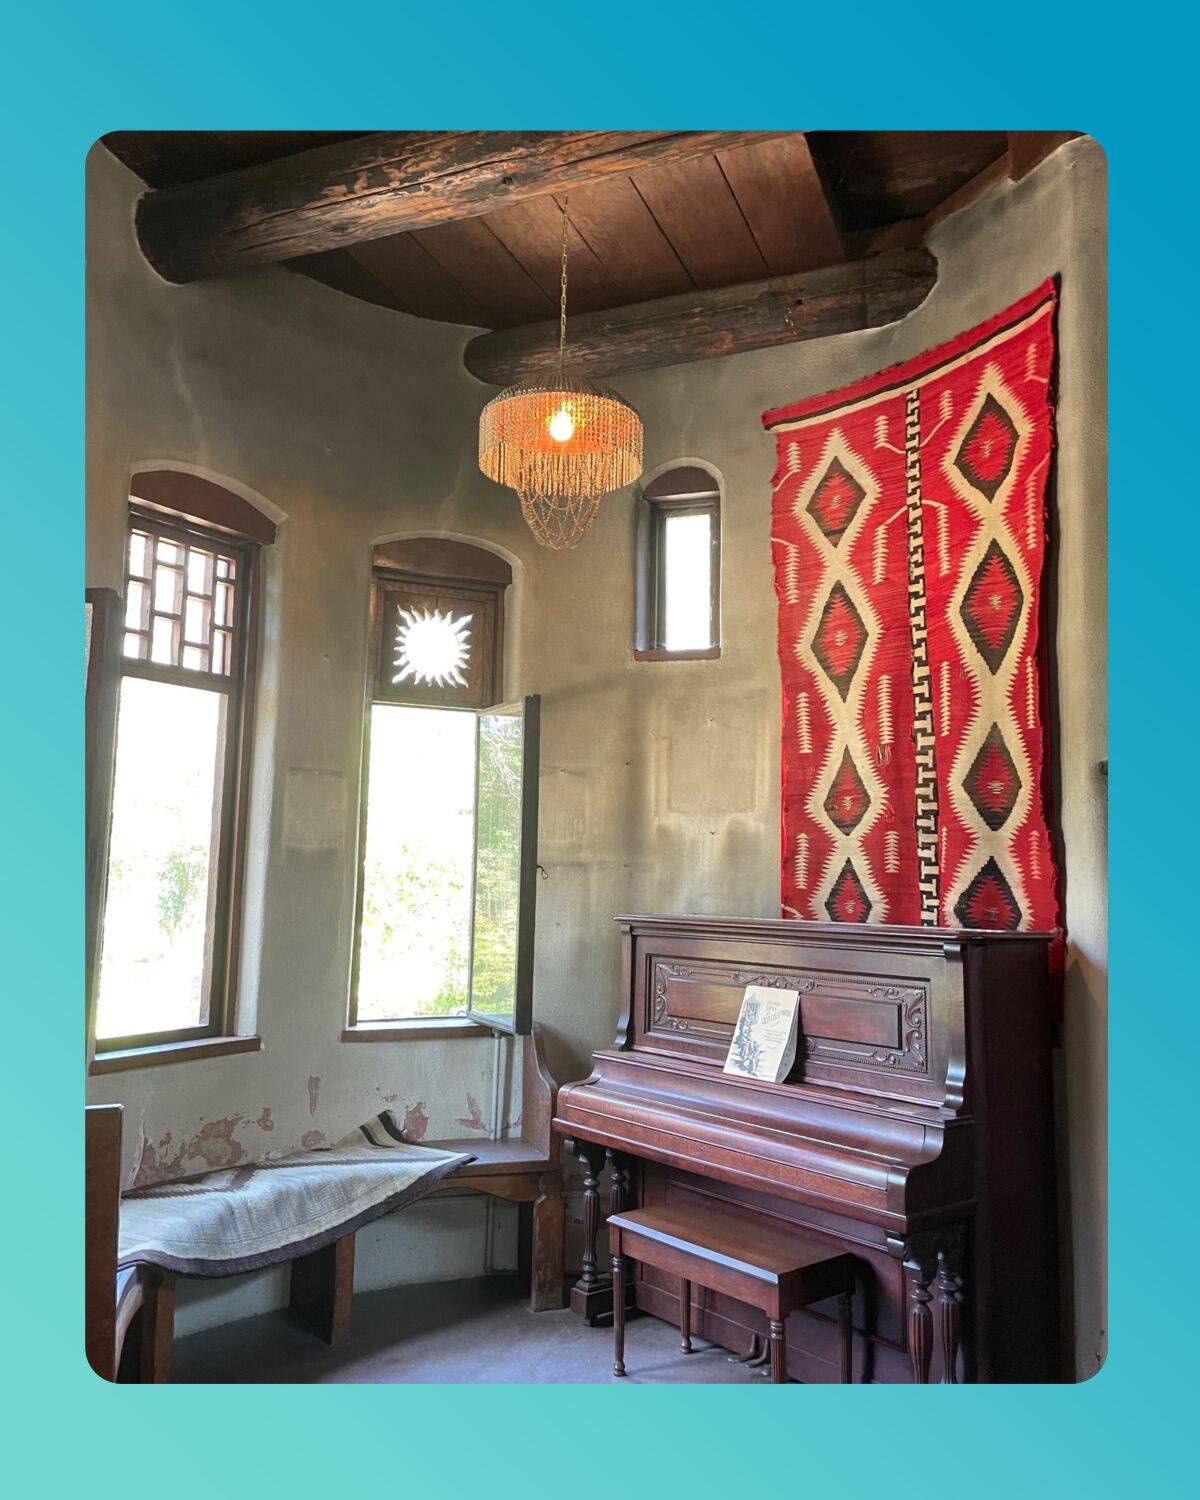 Room in the Lummis House with a piano and wall-hanging.